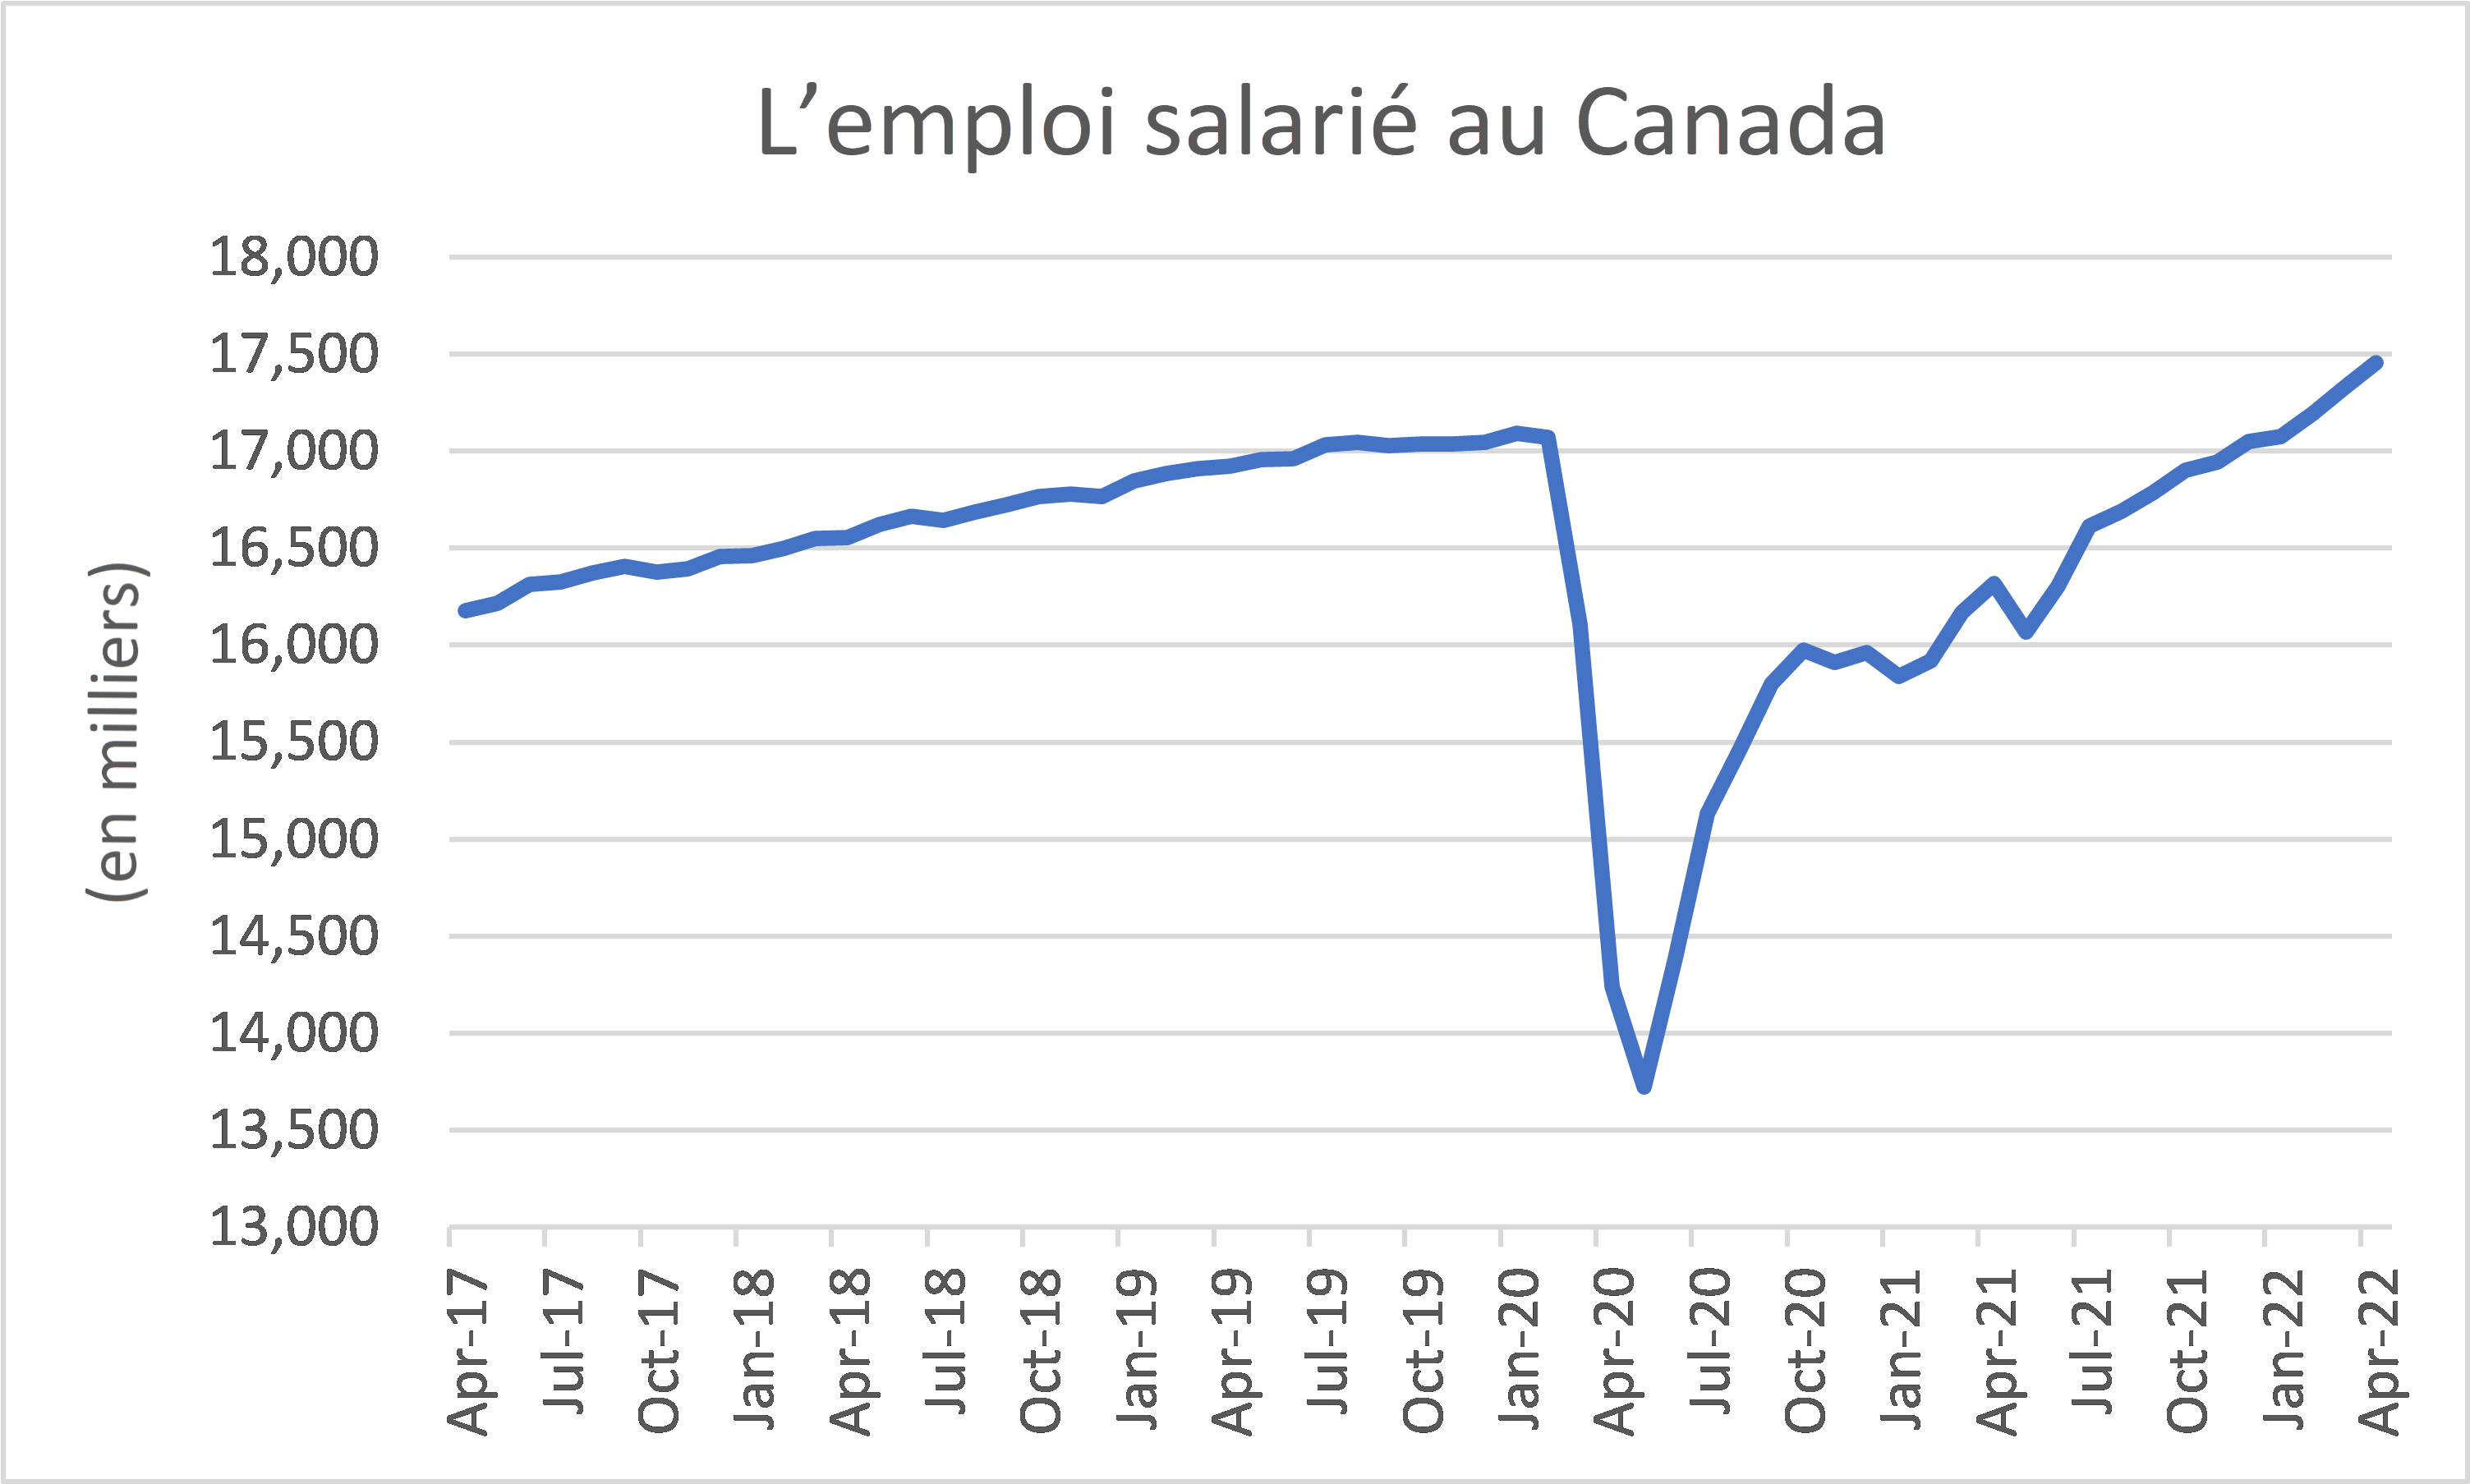 A graph showing Canadian payroll employment